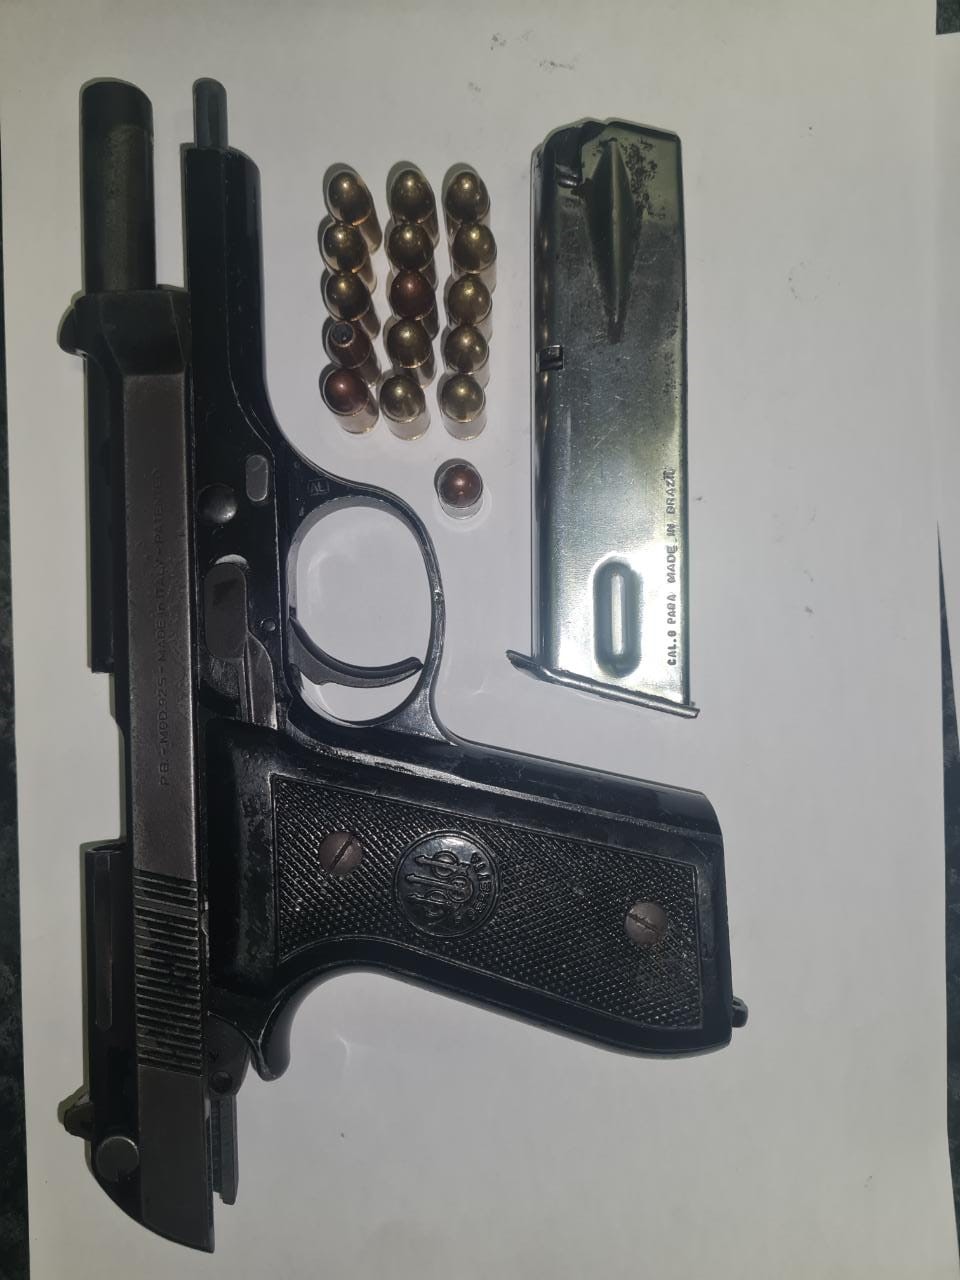 Suspects due in court for the possession of unlicensed firearms and ammunition